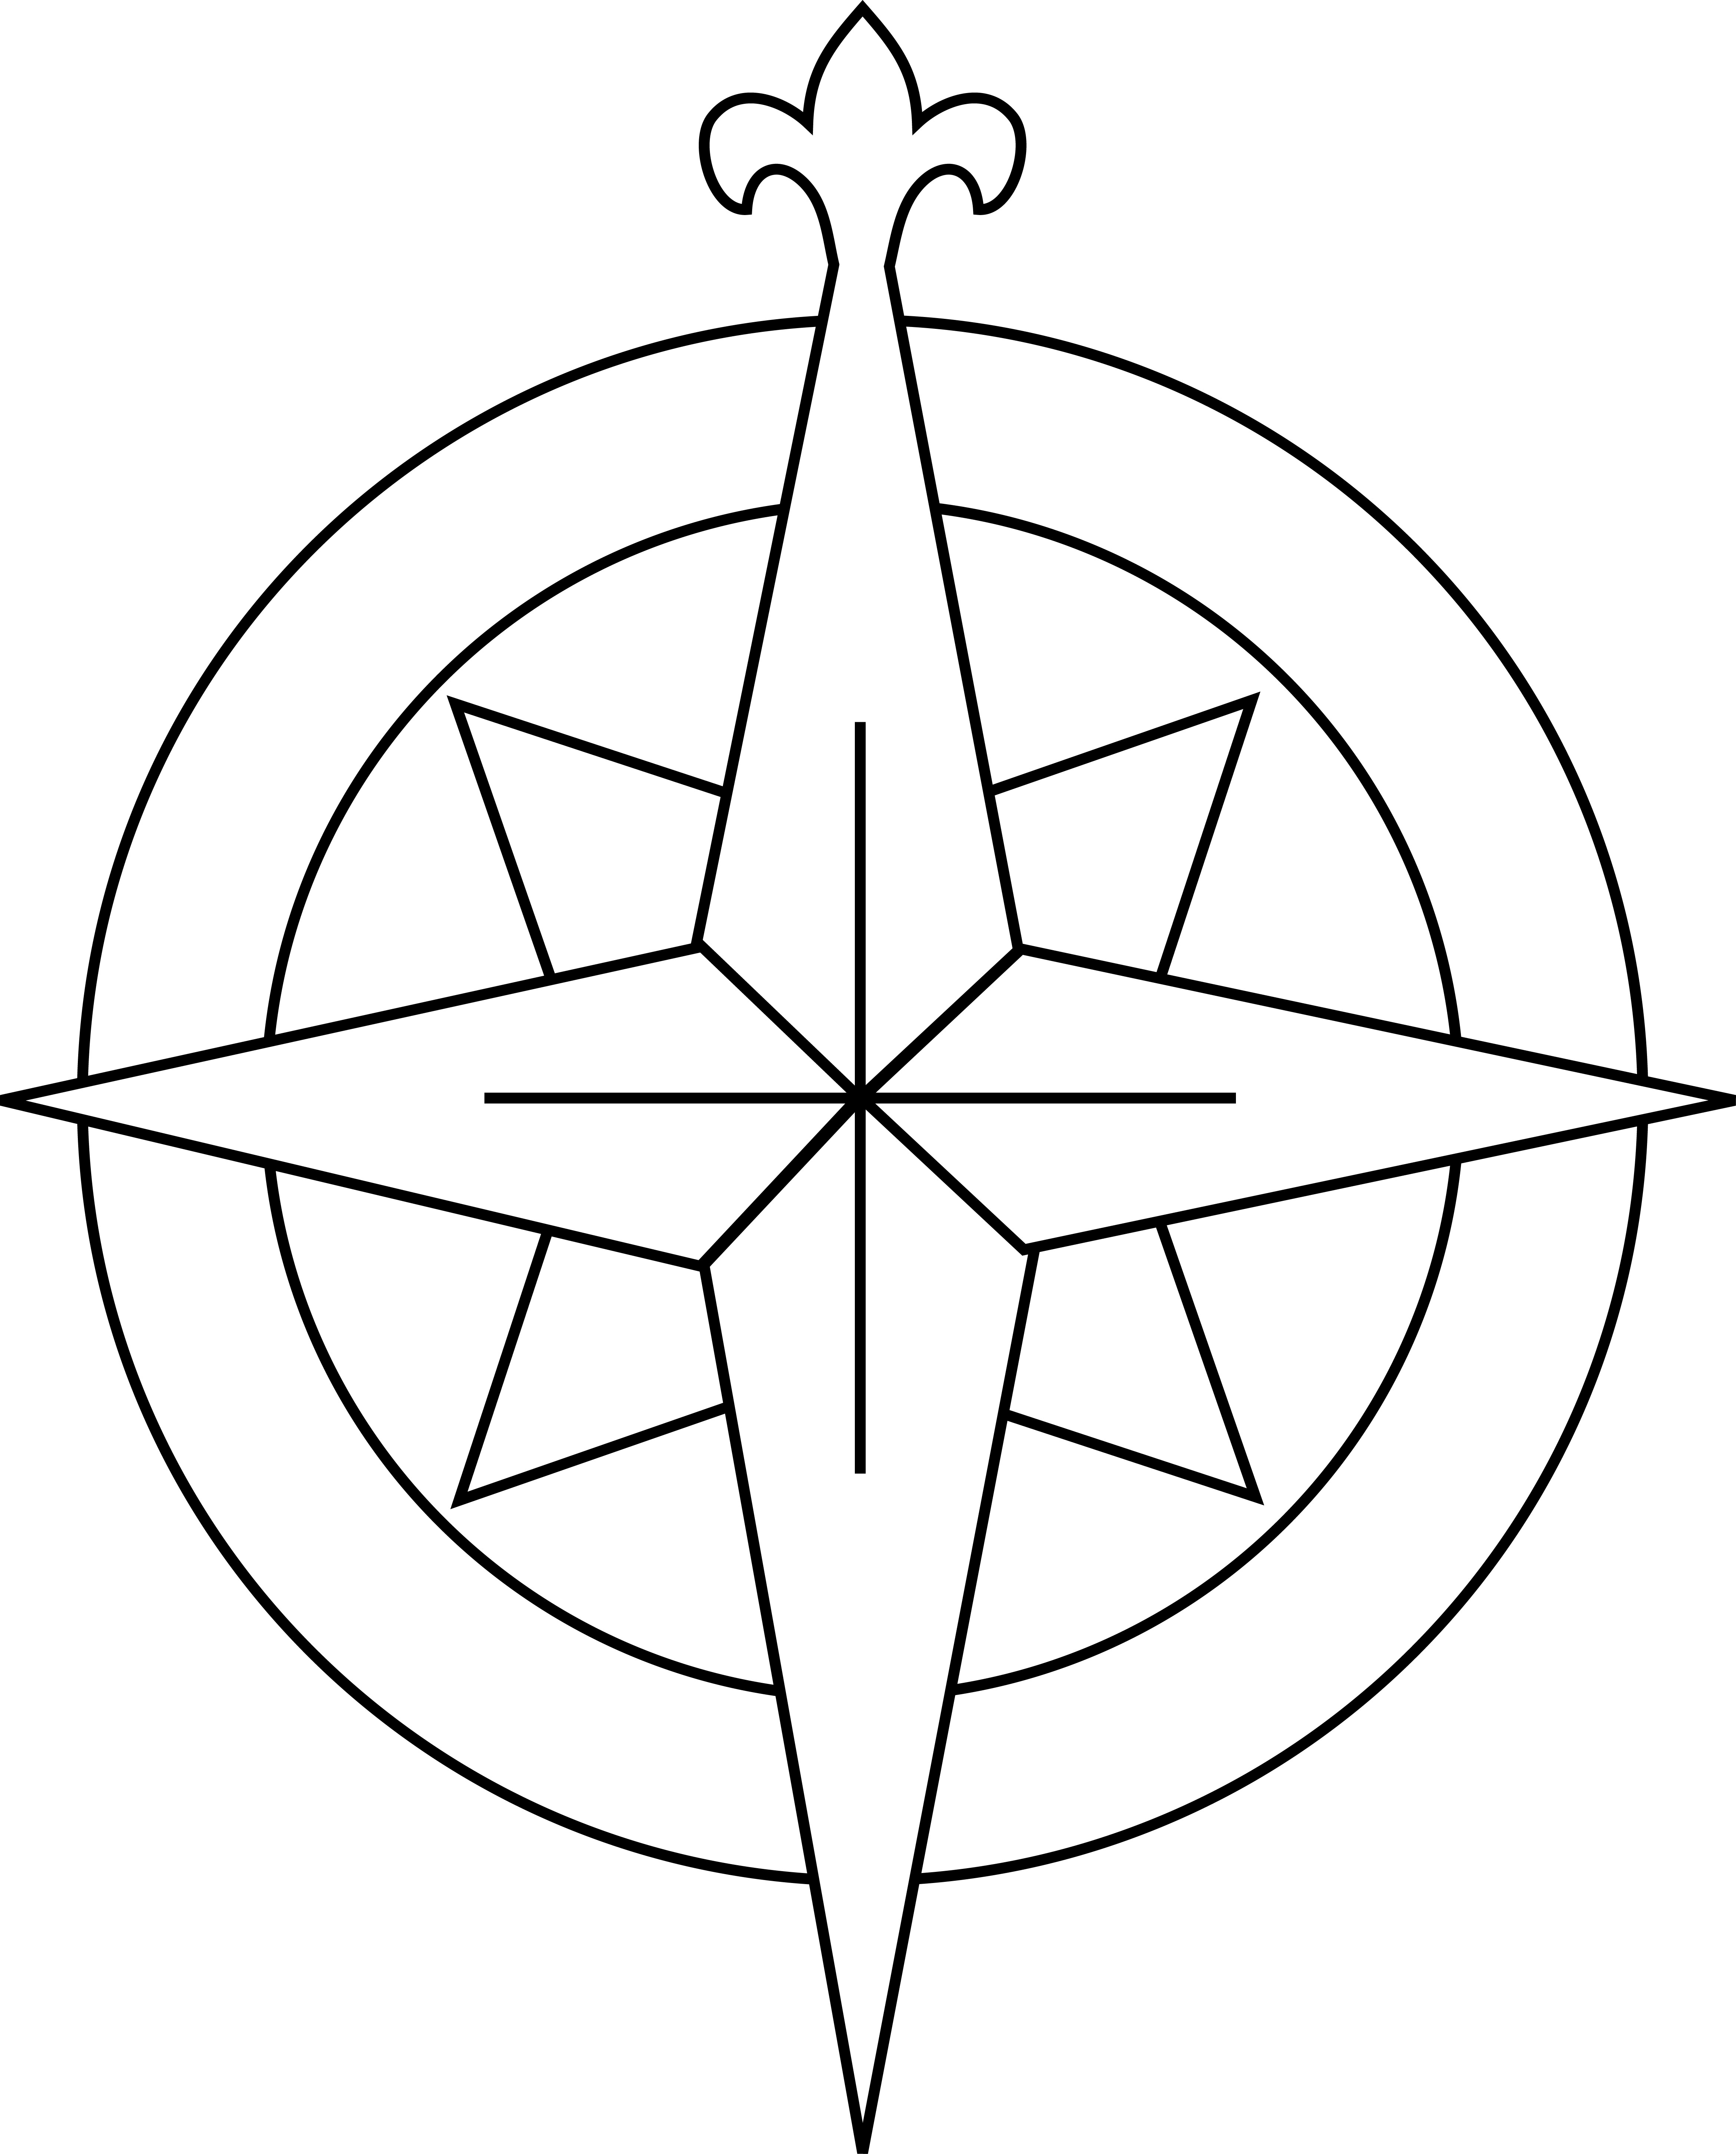 Compass Rose Black And White - ClipArt Best - ClipArt Best